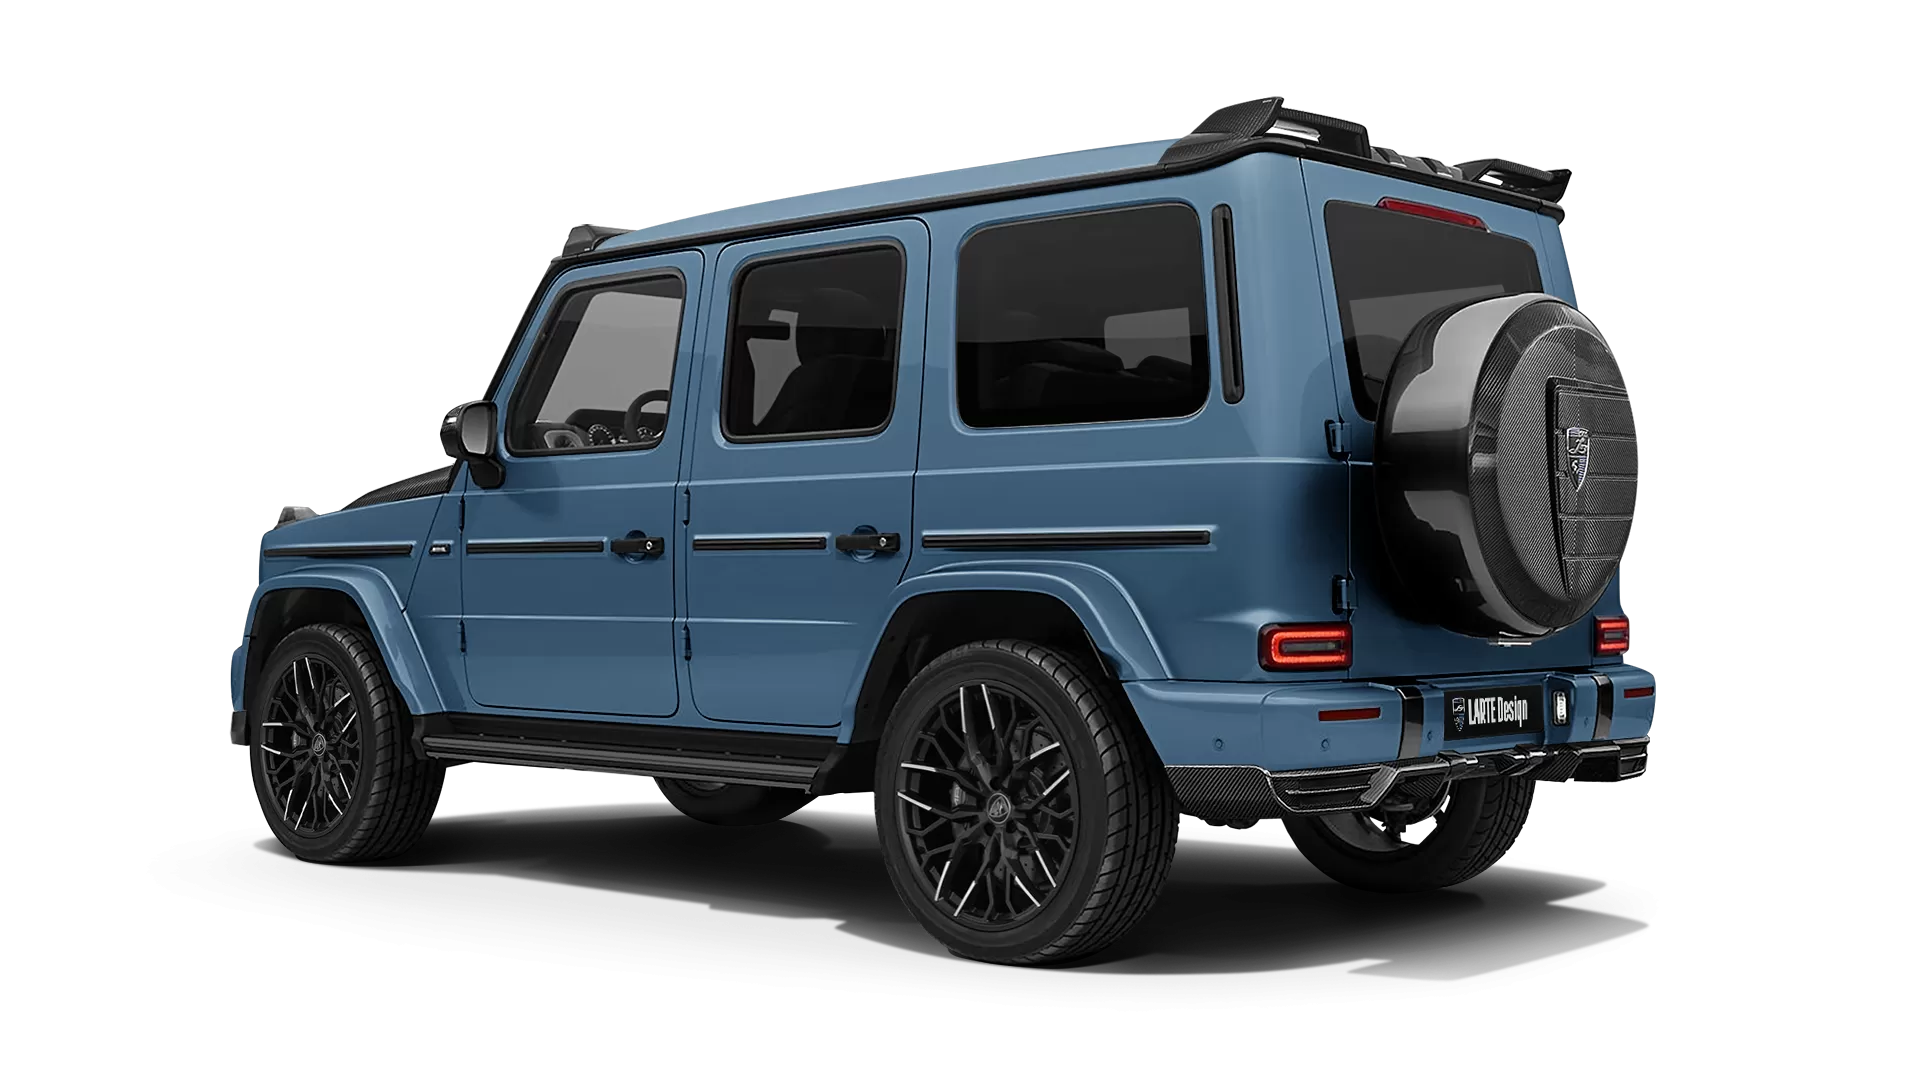 Mercedes G class W463 with carbon body kit: back view shown in Vintage Blue